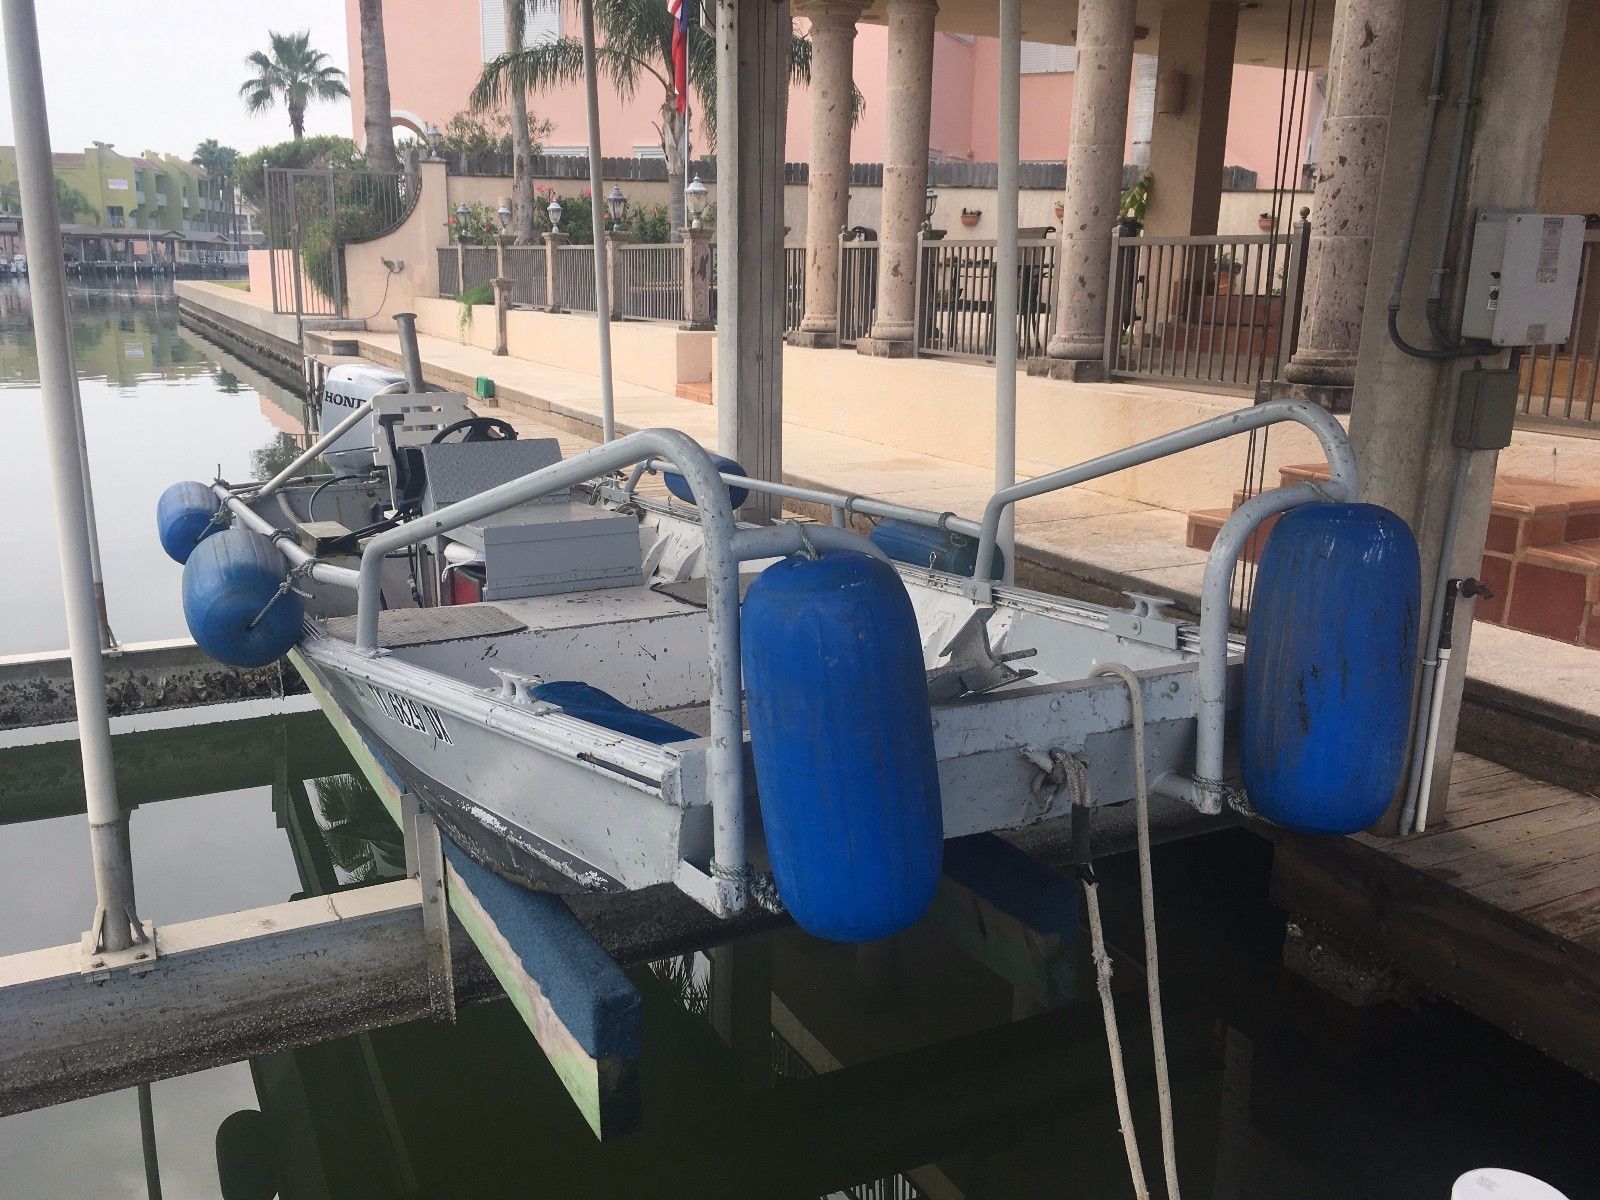 waco 16' jon boat 2004 for sale for $6,500 - boats-from